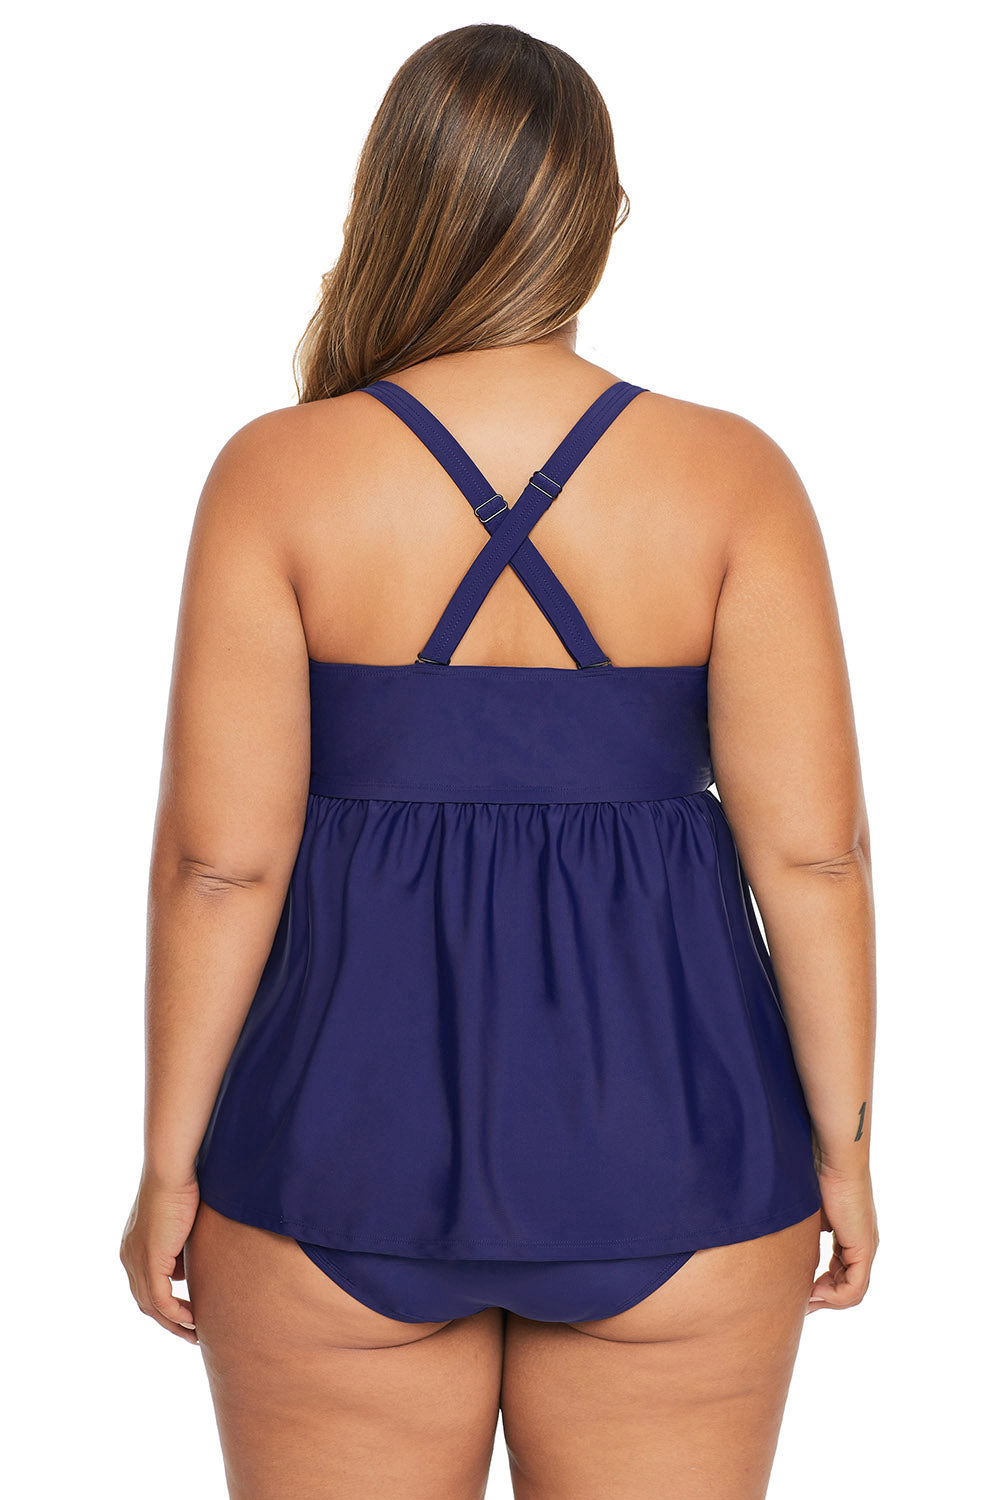 Plus Size Pleated Babydoll Top and High Waist Panty Swimsuit